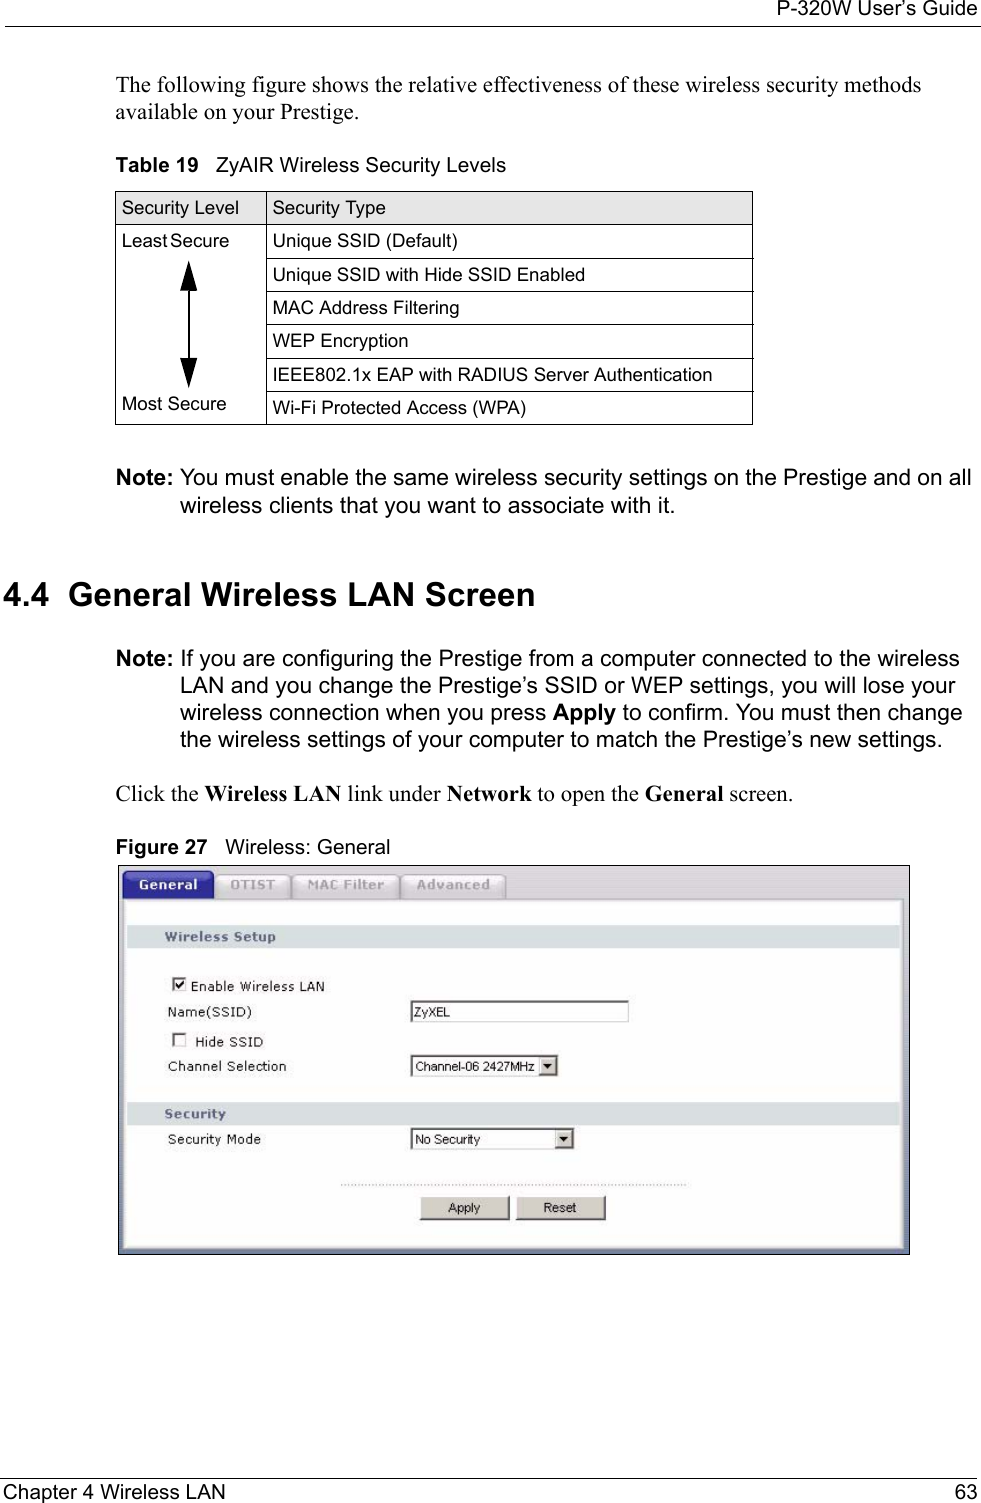 P-320W User’s GuideChapter 4 Wireless LAN 63The following figure shows the relative effectiveness of these wireless security methods available on your Prestige.Table 19   ZyAIR Wireless Security LevelsSecurity Level Security TypeLeast       Secure                                                                                  Most SecureUnique SSID (Default)Unique SSID with Hide SSID EnabledMAC Address FilteringWEP EncryptionIEEE802.1x EAP with RADIUS Server AuthenticationWi-Fi Protected Access (WPA)Note: You must enable the same wireless security settings on the Prestige and on all wireless clients that you want to associate with it. 4.4  General Wireless LAN Screen Note: If you are configuring the Prestige from a computer connected to the wireless LAN and you change the Prestige’s SSID or WEP settings, you will lose your wireless connection when you press Apply to confirm. You must then change the wireless settings of your computer to match the Prestige’s new settings.Click the Wireless LAN link under Network to open the General screen.Figure 27   Wireless: General 